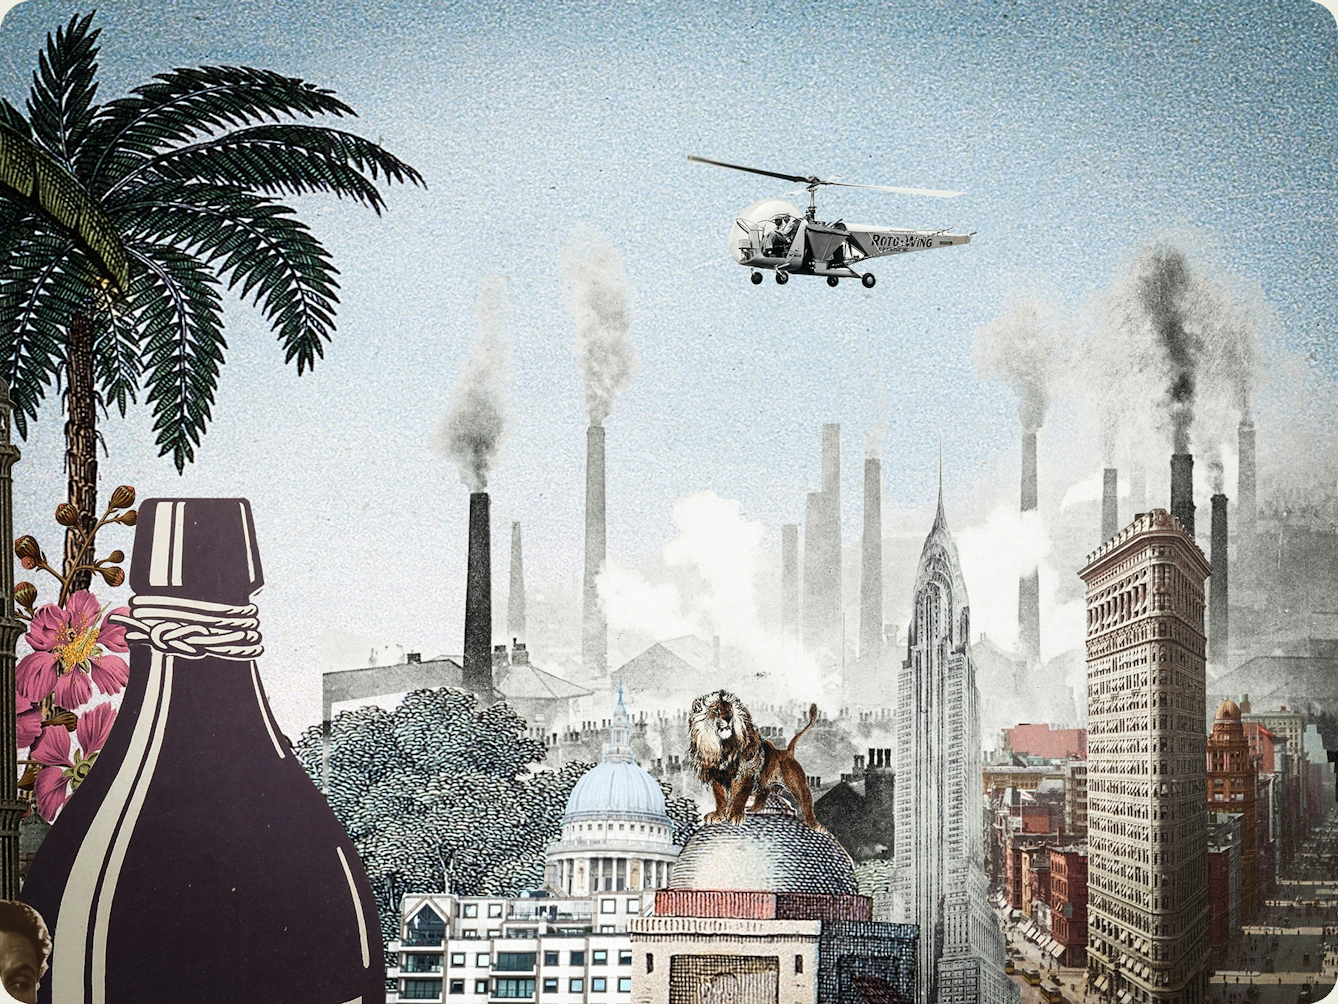 Artwork using collage. The collaged elements are made up of archive material which includes vintage photographs, etchings, painted illustrations, lithographic prints and line drawings. This artwork depicts a scene with an urban and rural combined background, where high chimneys billowing smoke and skyscrapers rise in the distance. In the middle distance a lion stands on the top of a domed building. The neck of a large bottle can be seen on the left hand side of the image. In the blue sky on the right above the chimneys a helicopter hovers, travelling from right to left over the scene.